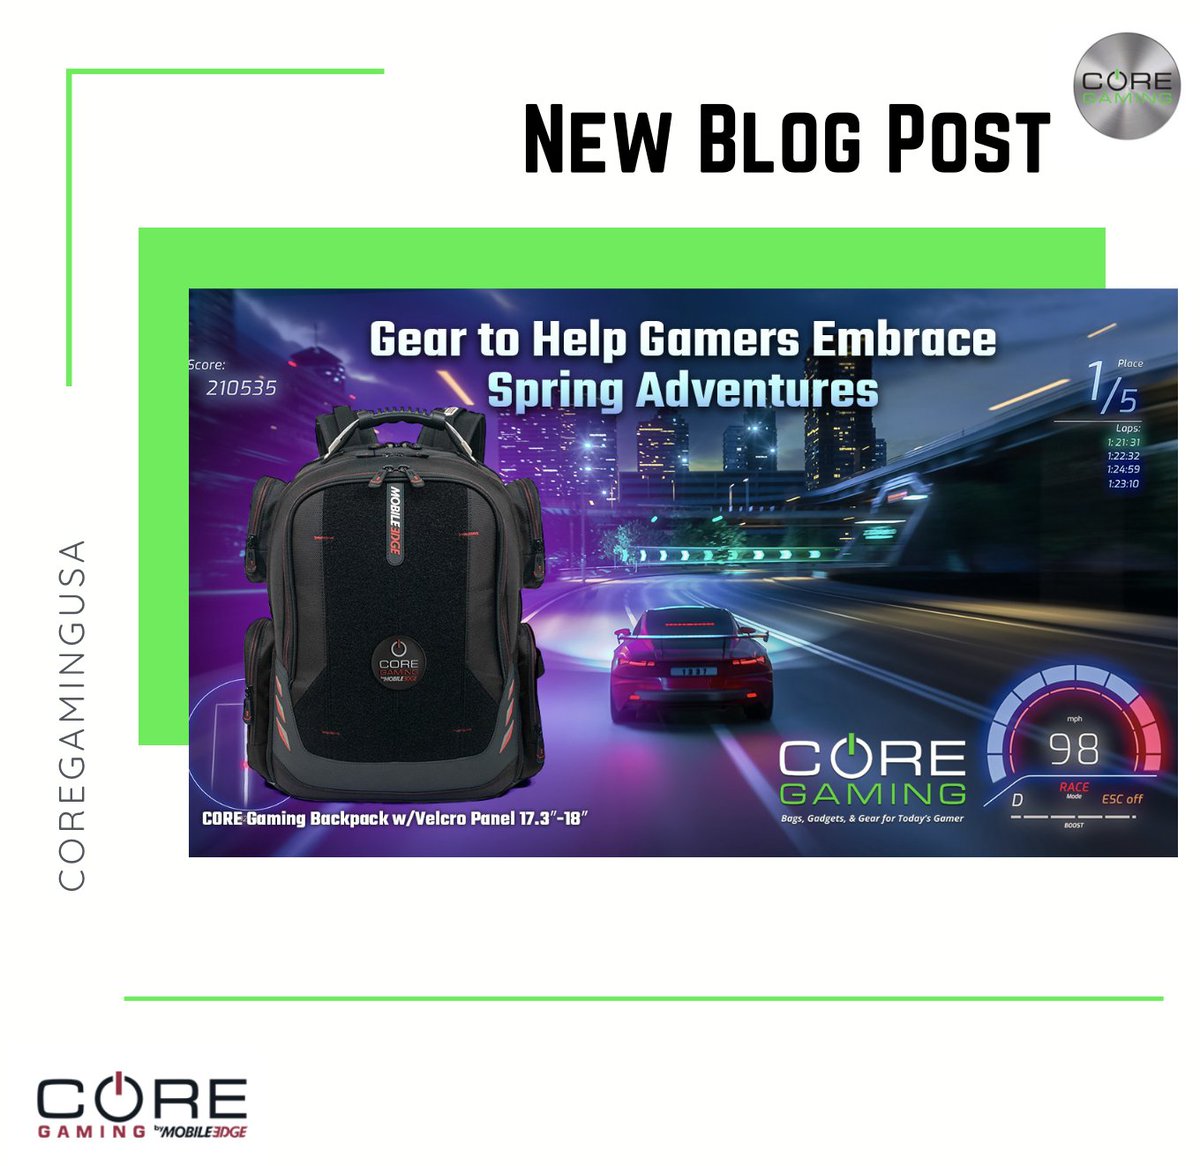 With #gaming platforms more mobile than ever, CORE Gaming invites all gamers to combine their passion for gaming with the joys of springtime travel🎮✈️

hubs.li/Q02q_6Sh0

.

.
#Gaming #COREgaming #Gamer #weeklyblog